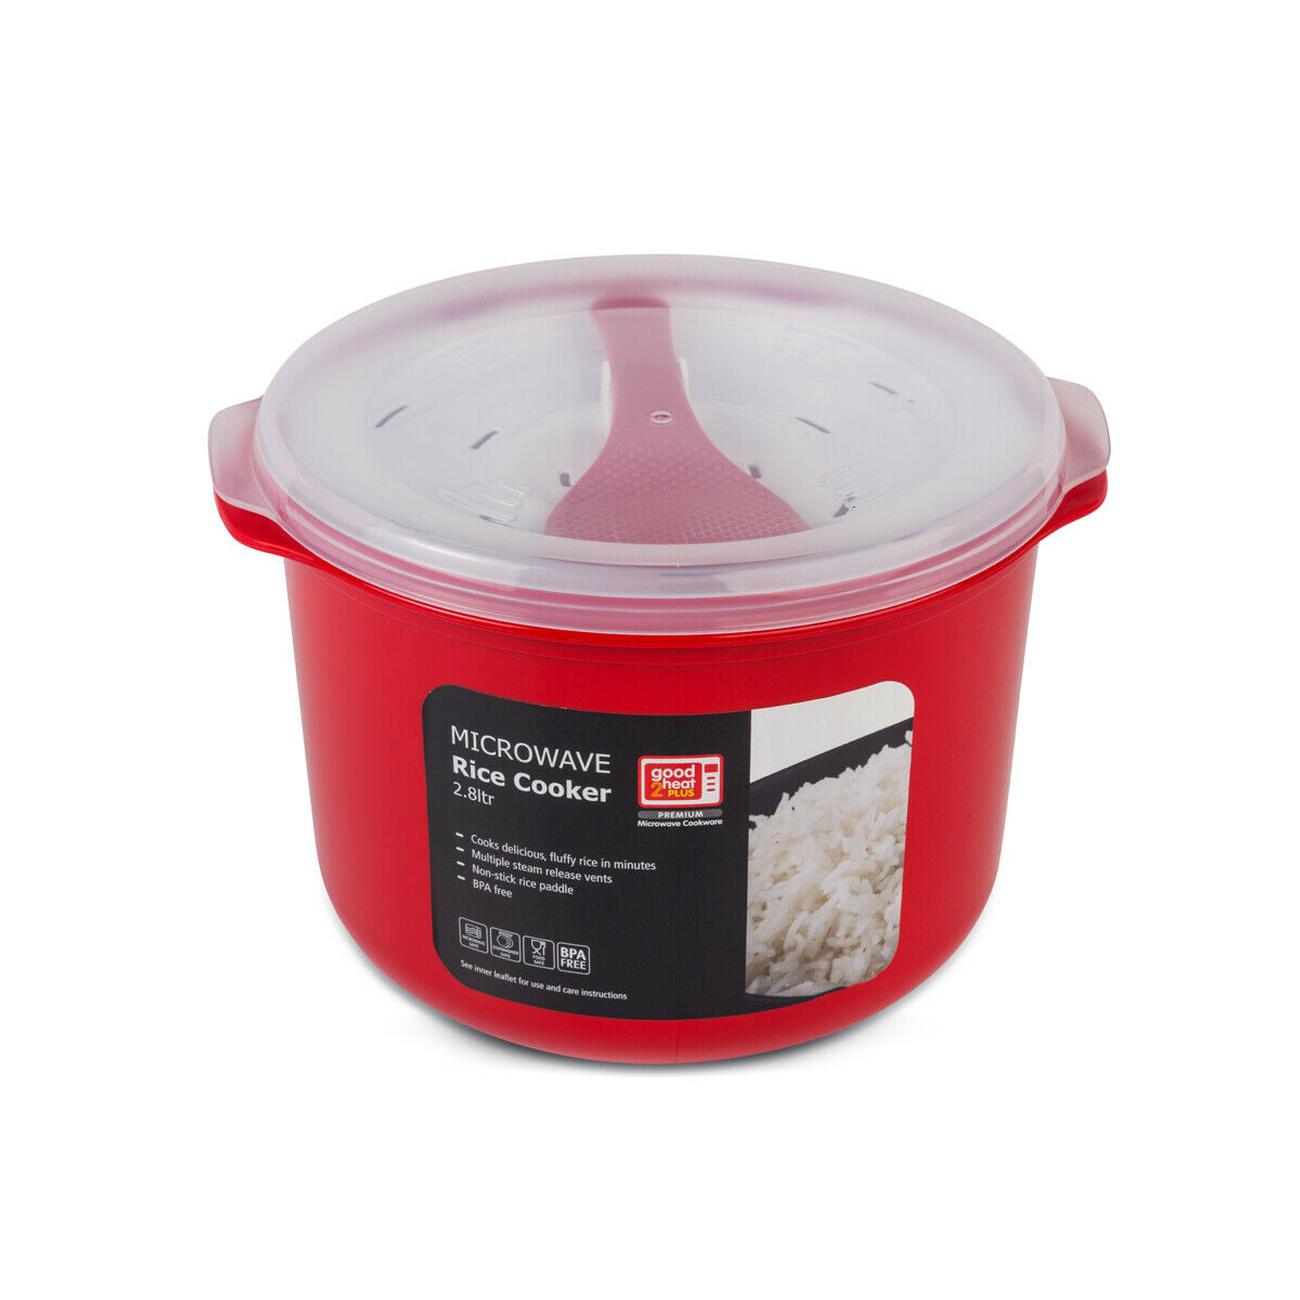 Microwave Rice Cooker 2.8L